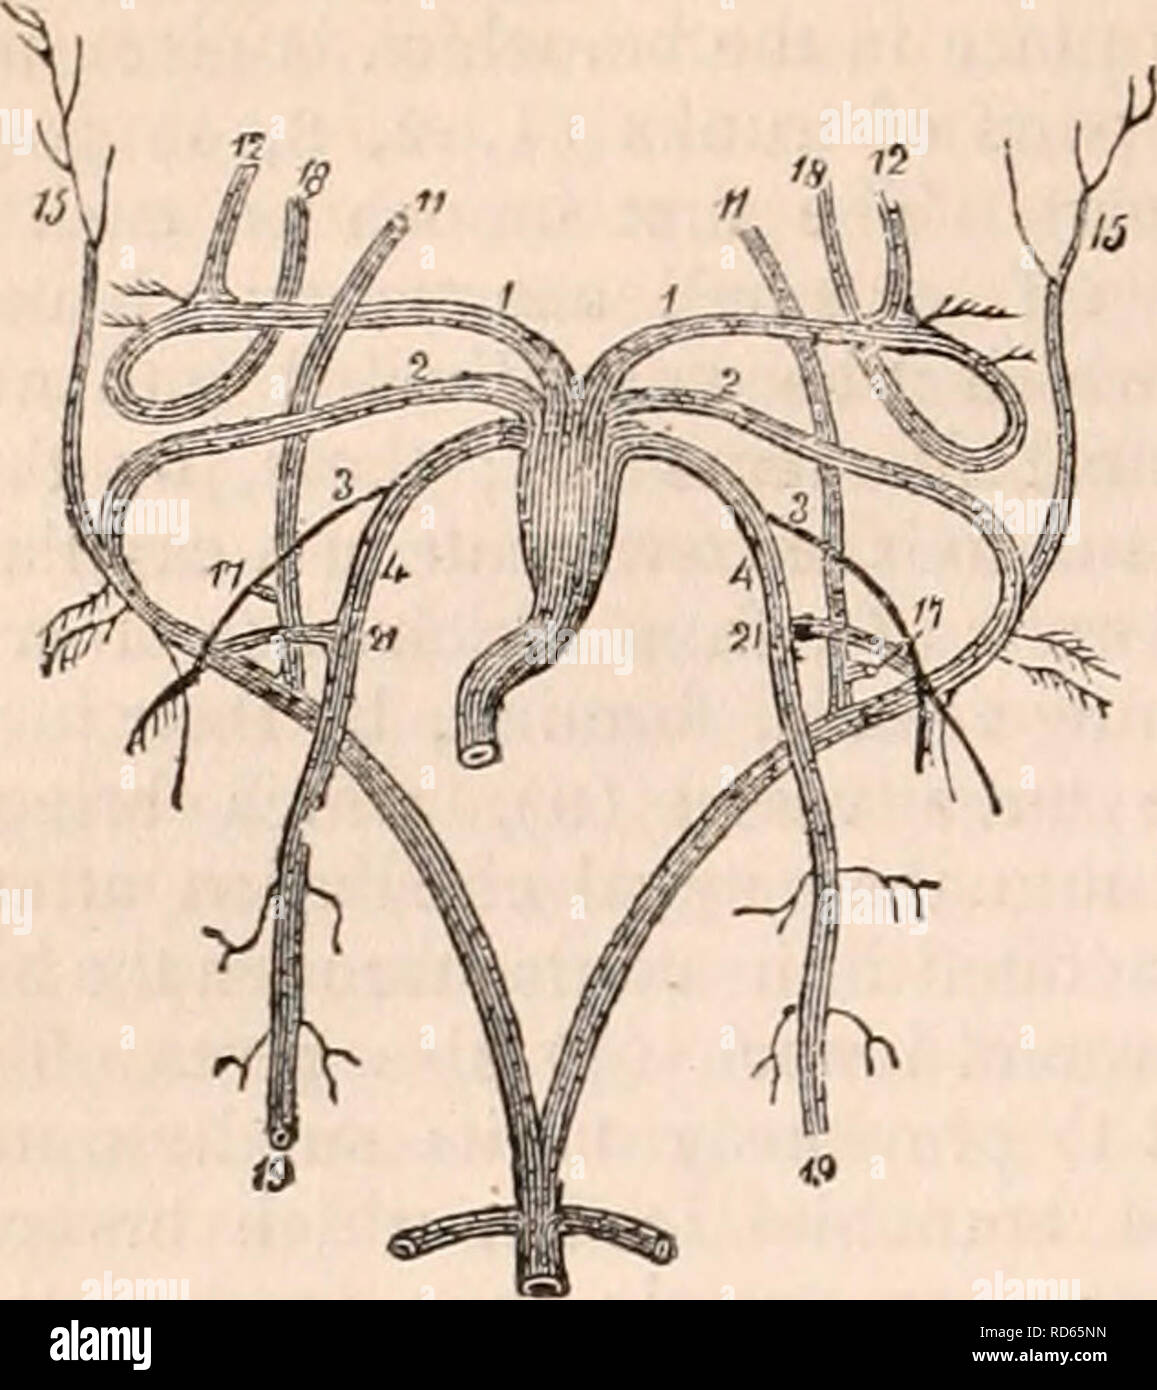 . The cyclopædia of anatomy and physiology. Anatomy; Physiology; Zoology. 98 AMPHIBIA. Fig. 20.. fore, the heart consists of a single ventricle, and of two auricles. The existence of a se- cond auricle was first demonstrated in the higher forms, the frogs and toads, by Dr. Davy,* and, although in the latest works of Cuvier and Meckel the auricle in these forms is de- scribed as single, yet the more complicated structure has since been amply confirmed by many other anatomists. Weberf especially has described the biauricular structure in a large American frog; but he failed to demon- strate it i Stock Photo